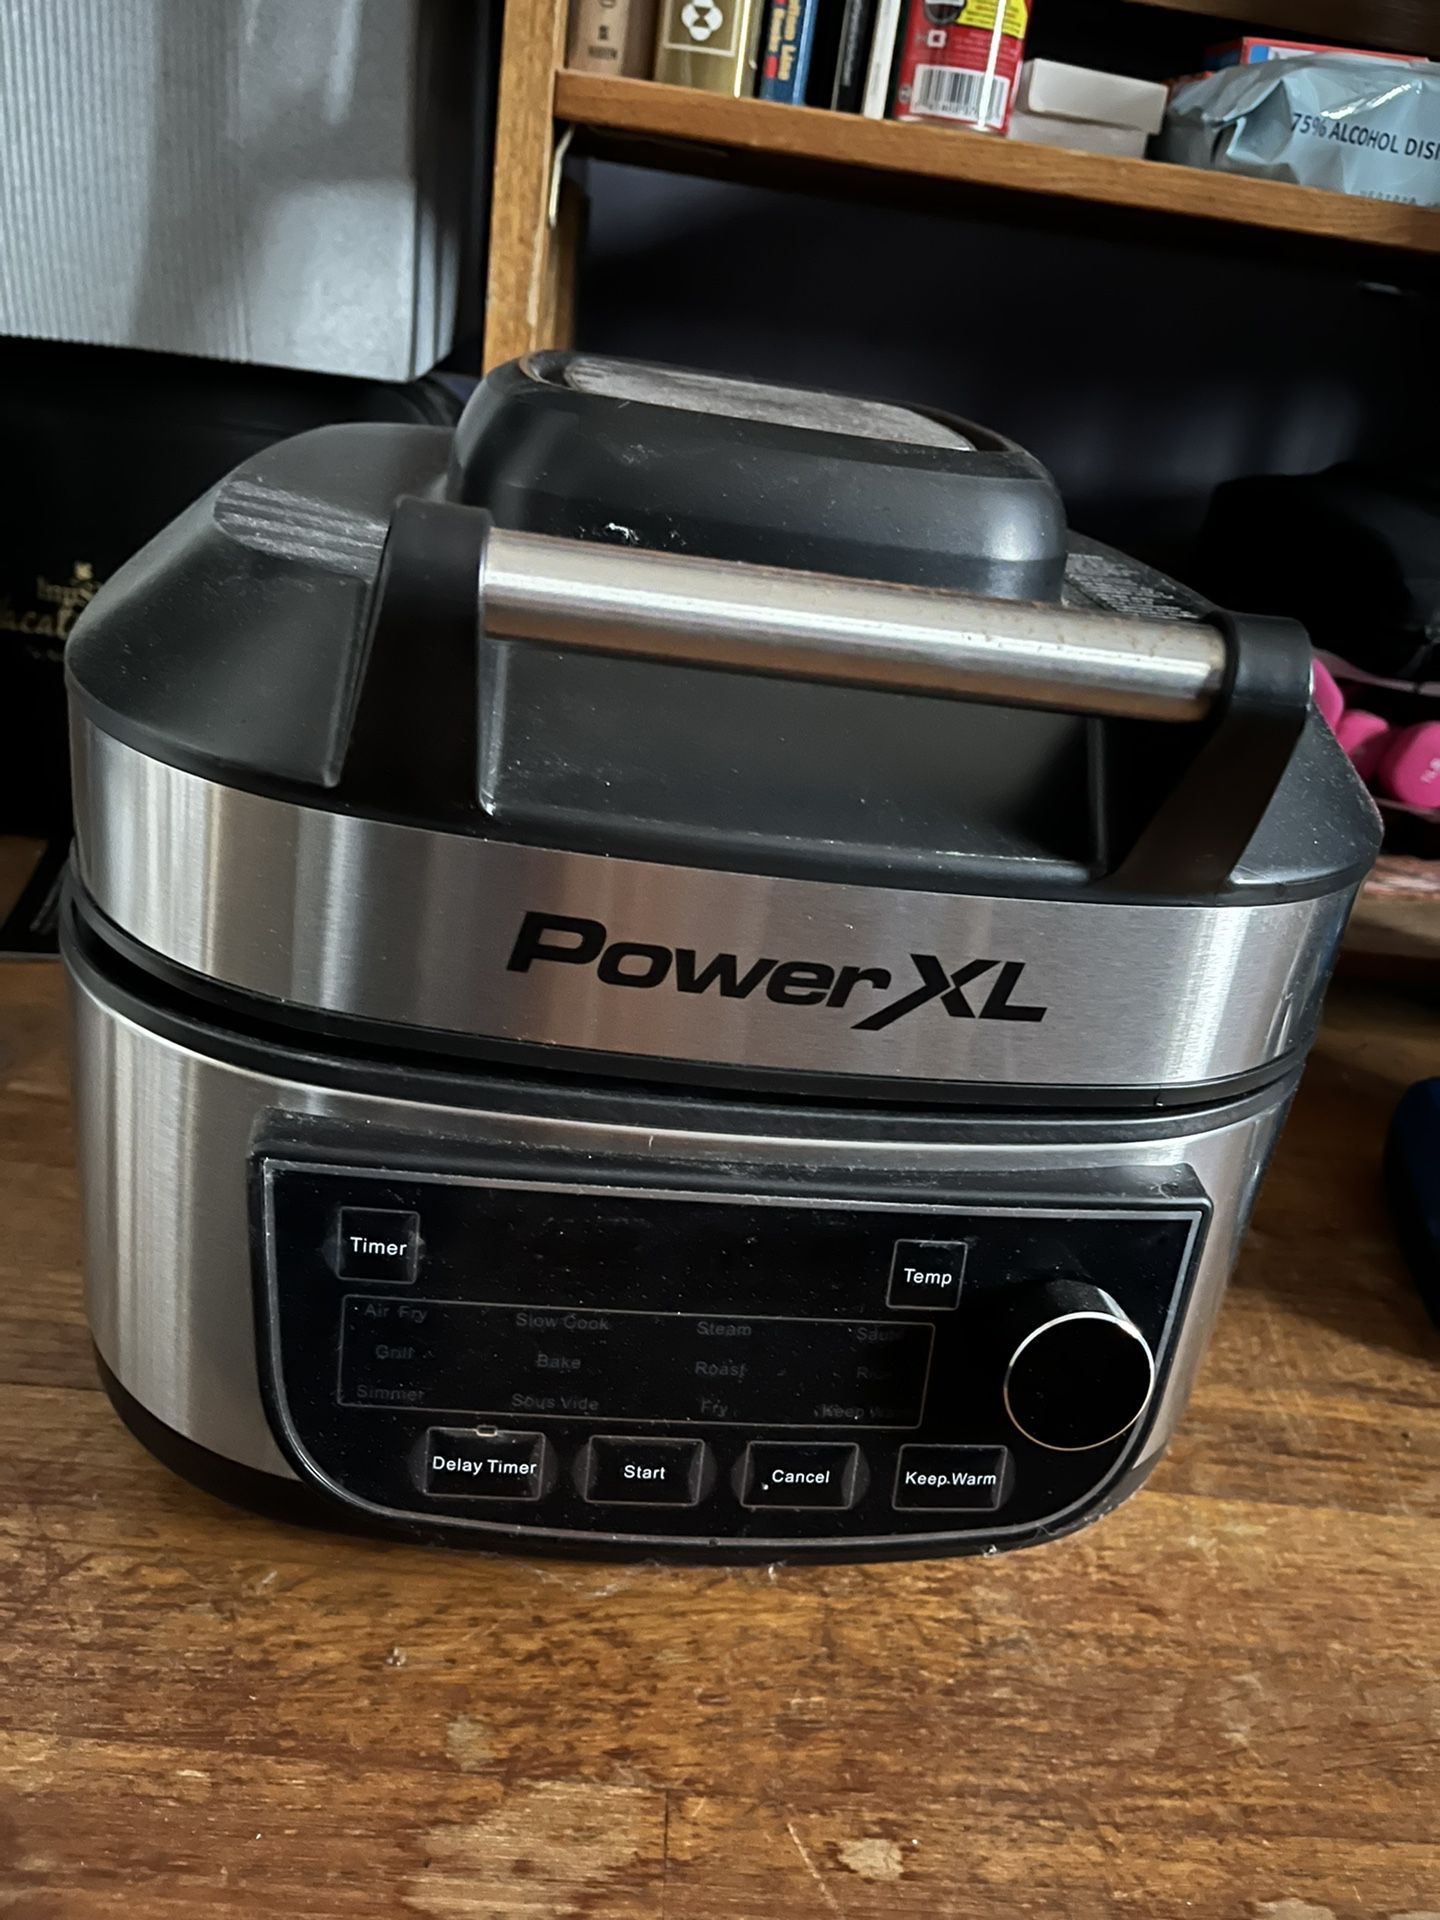 PowerXL Grill Air Fryer Combo Deluxe 6 QT 12-in-1 Indoor Grill, Air Fryer,  Slow Cooker, Roast, Bake, 1550-Watts, Stainless Steel Finish. Never Used It  for Sale in Lawrence, MA - OfferUp